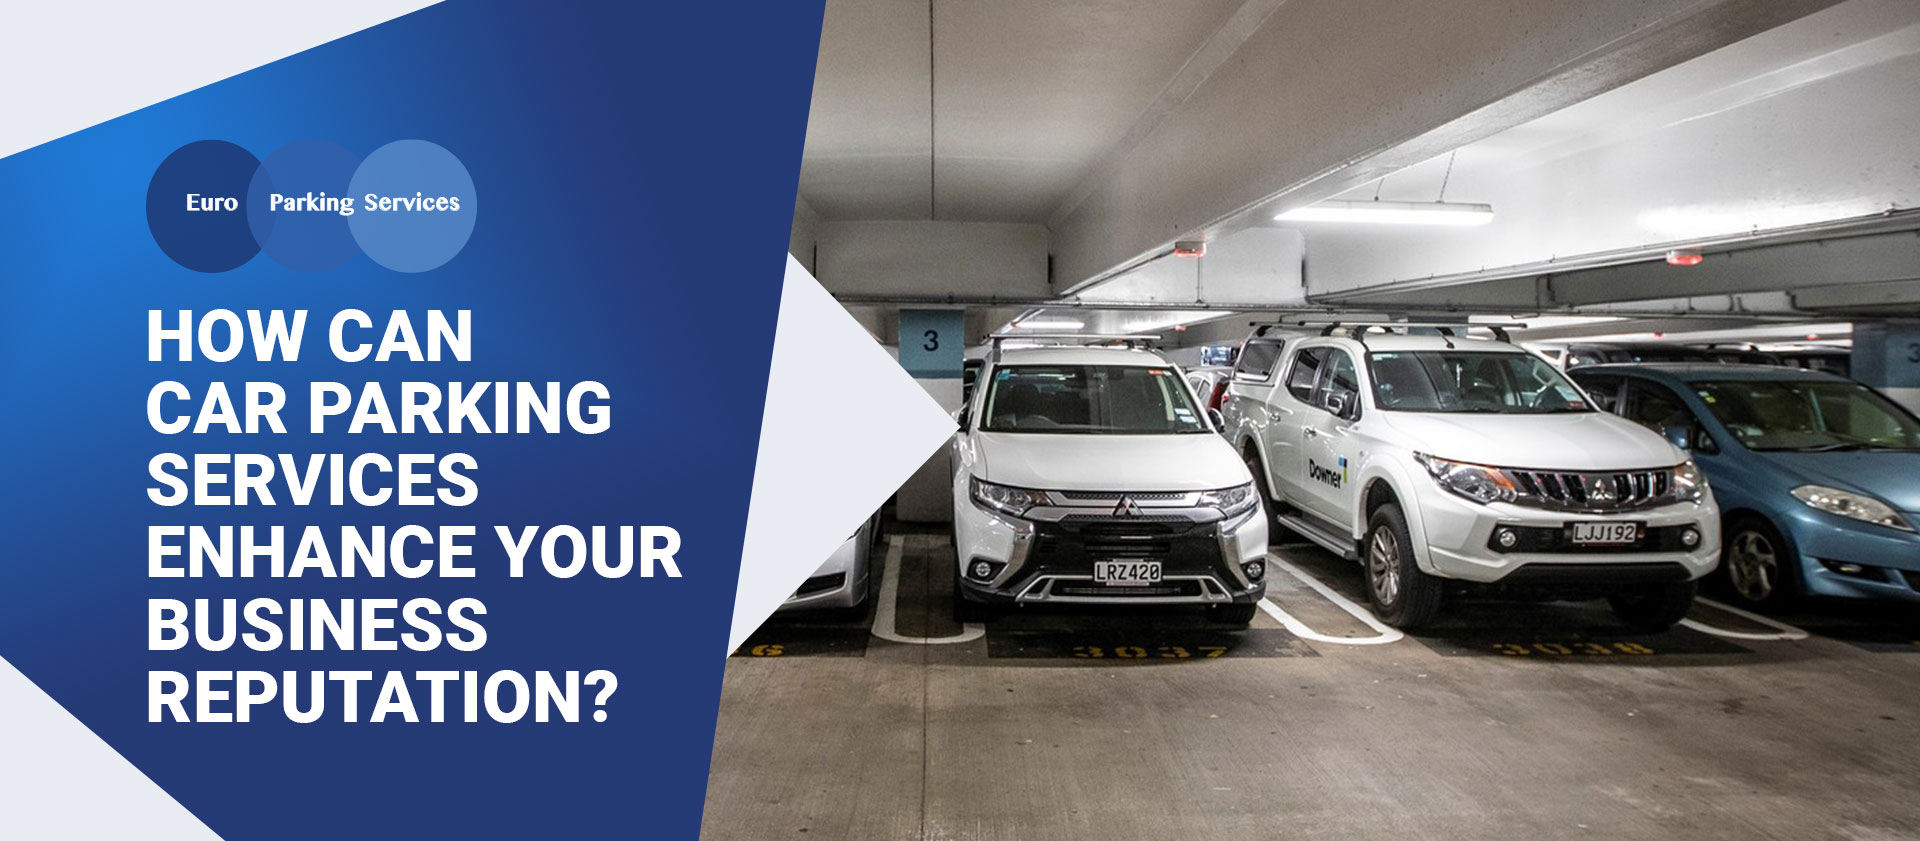 How Can Car Parking Services Enhance Your Business Reputation